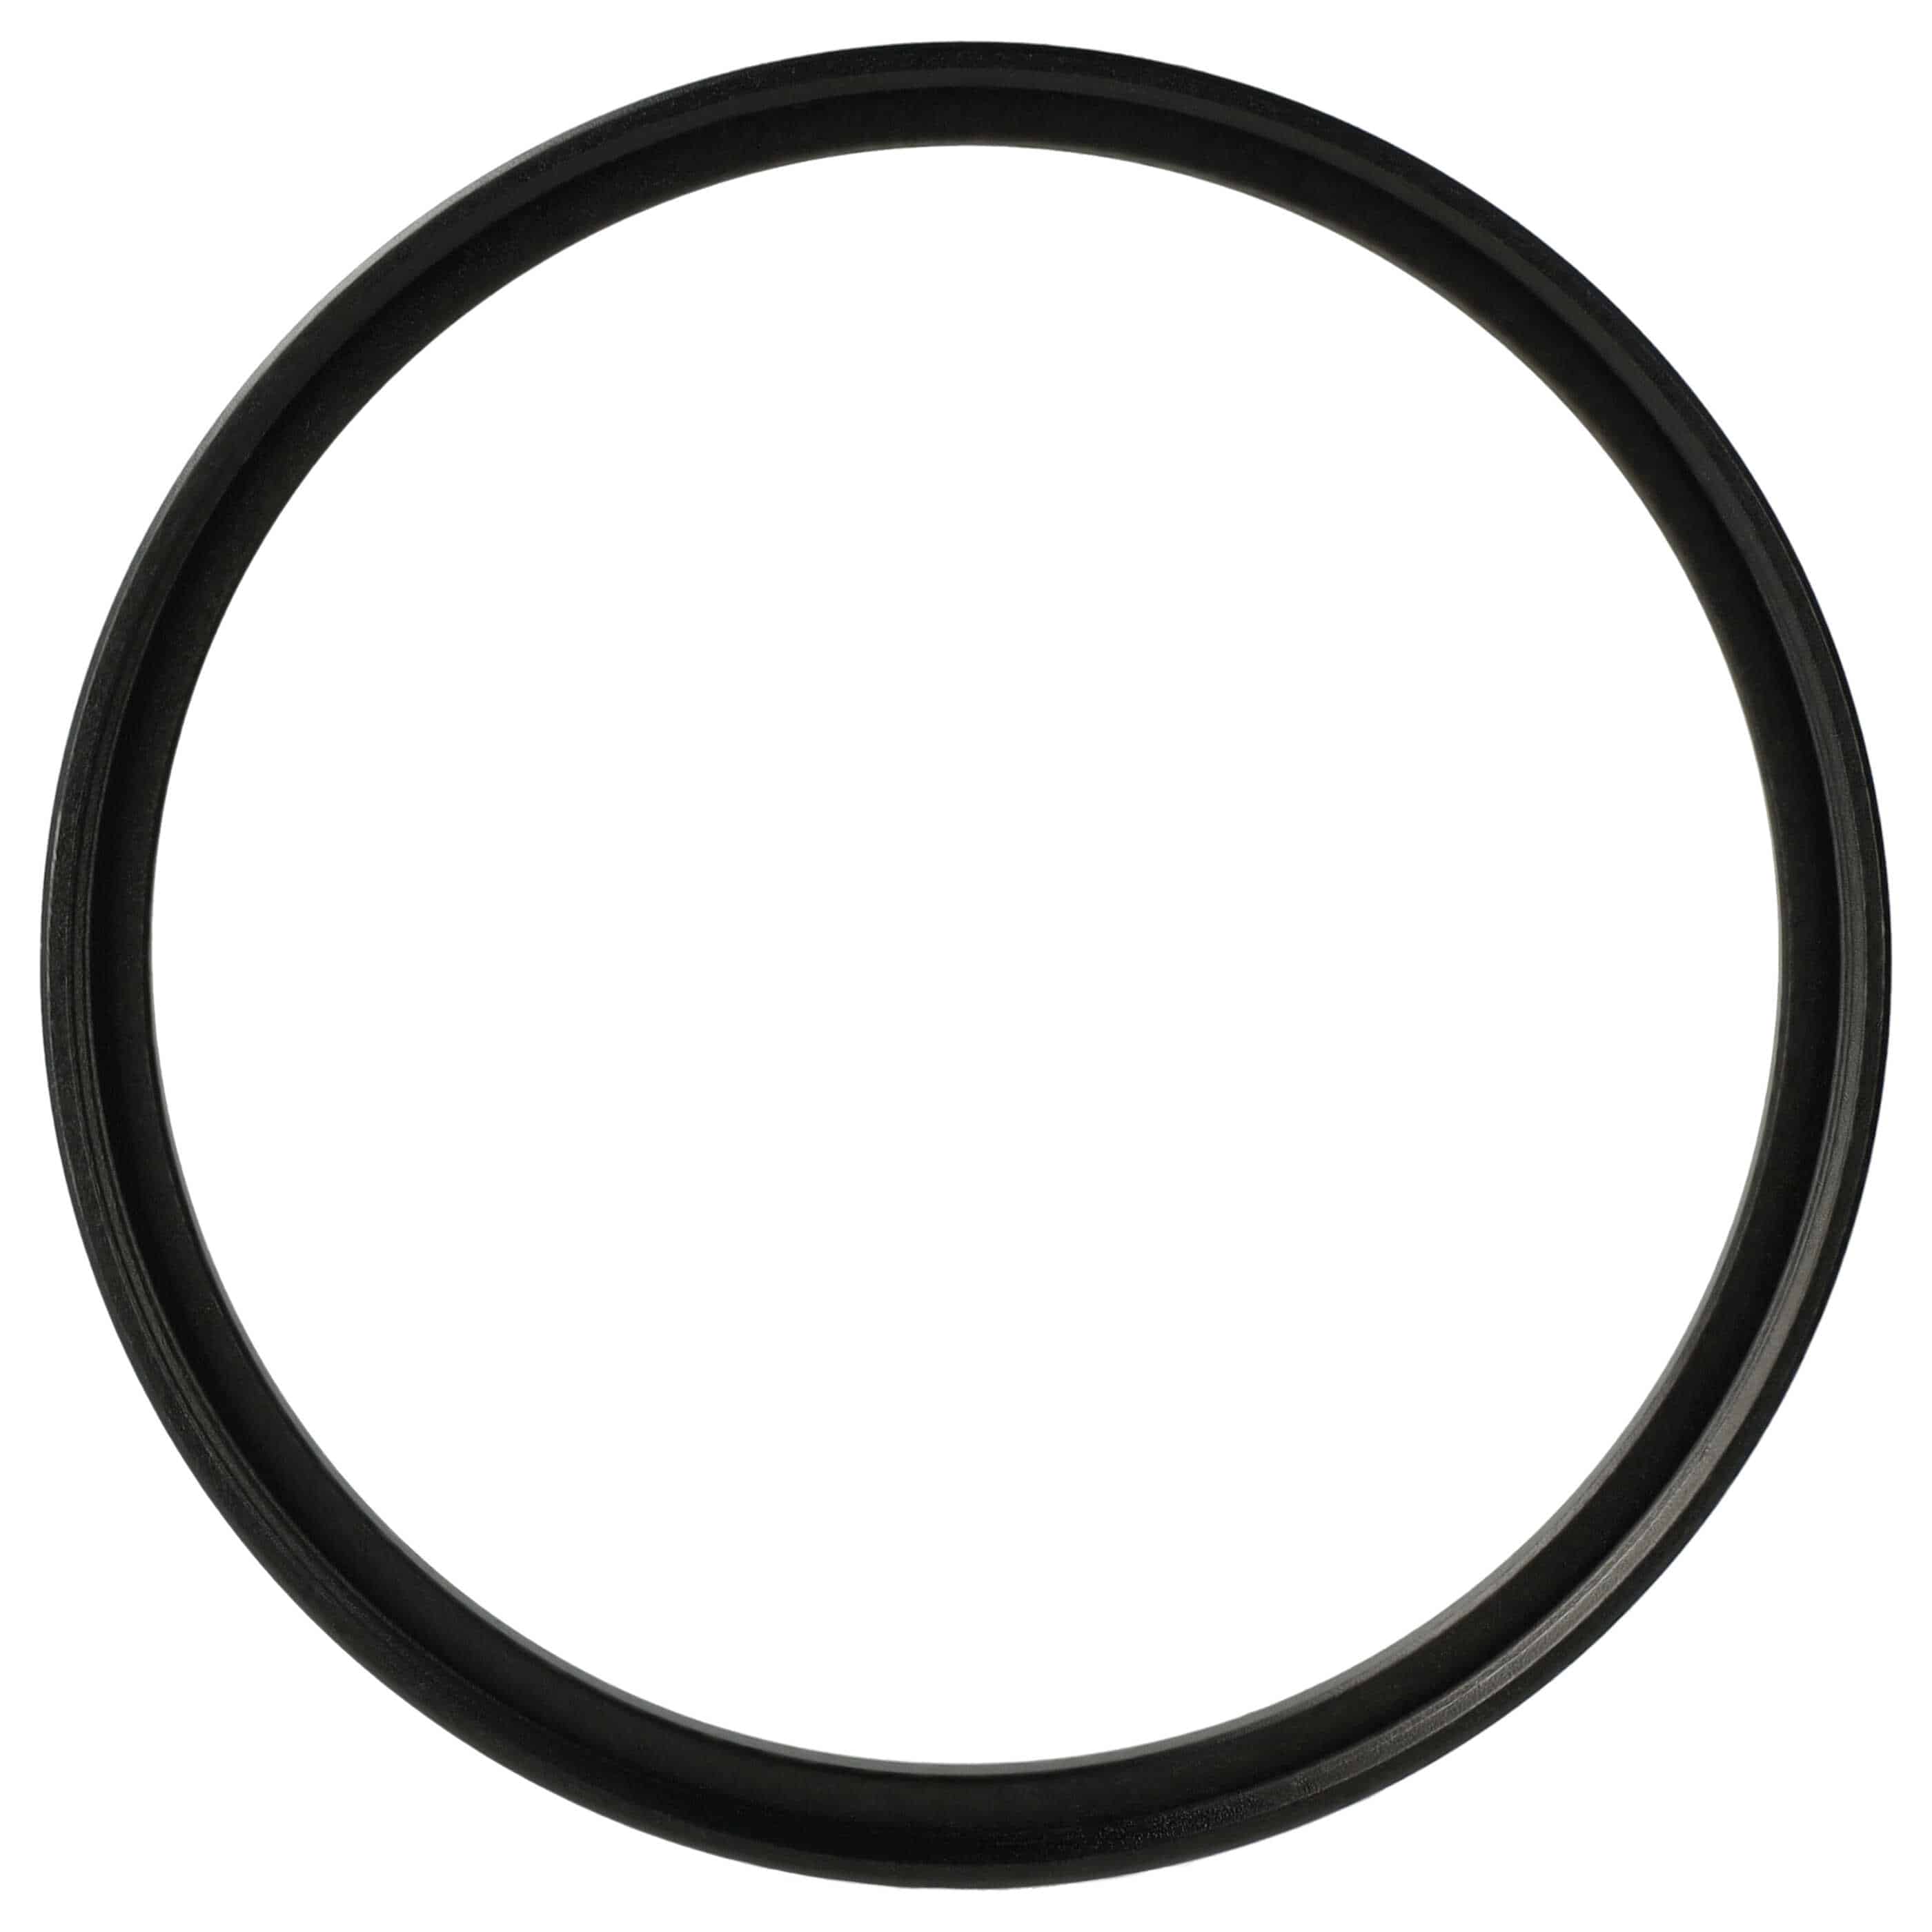 Step-Up Ring Adapter of 60 mm to 62 mmfor various Camera Lens - Filter Adapter